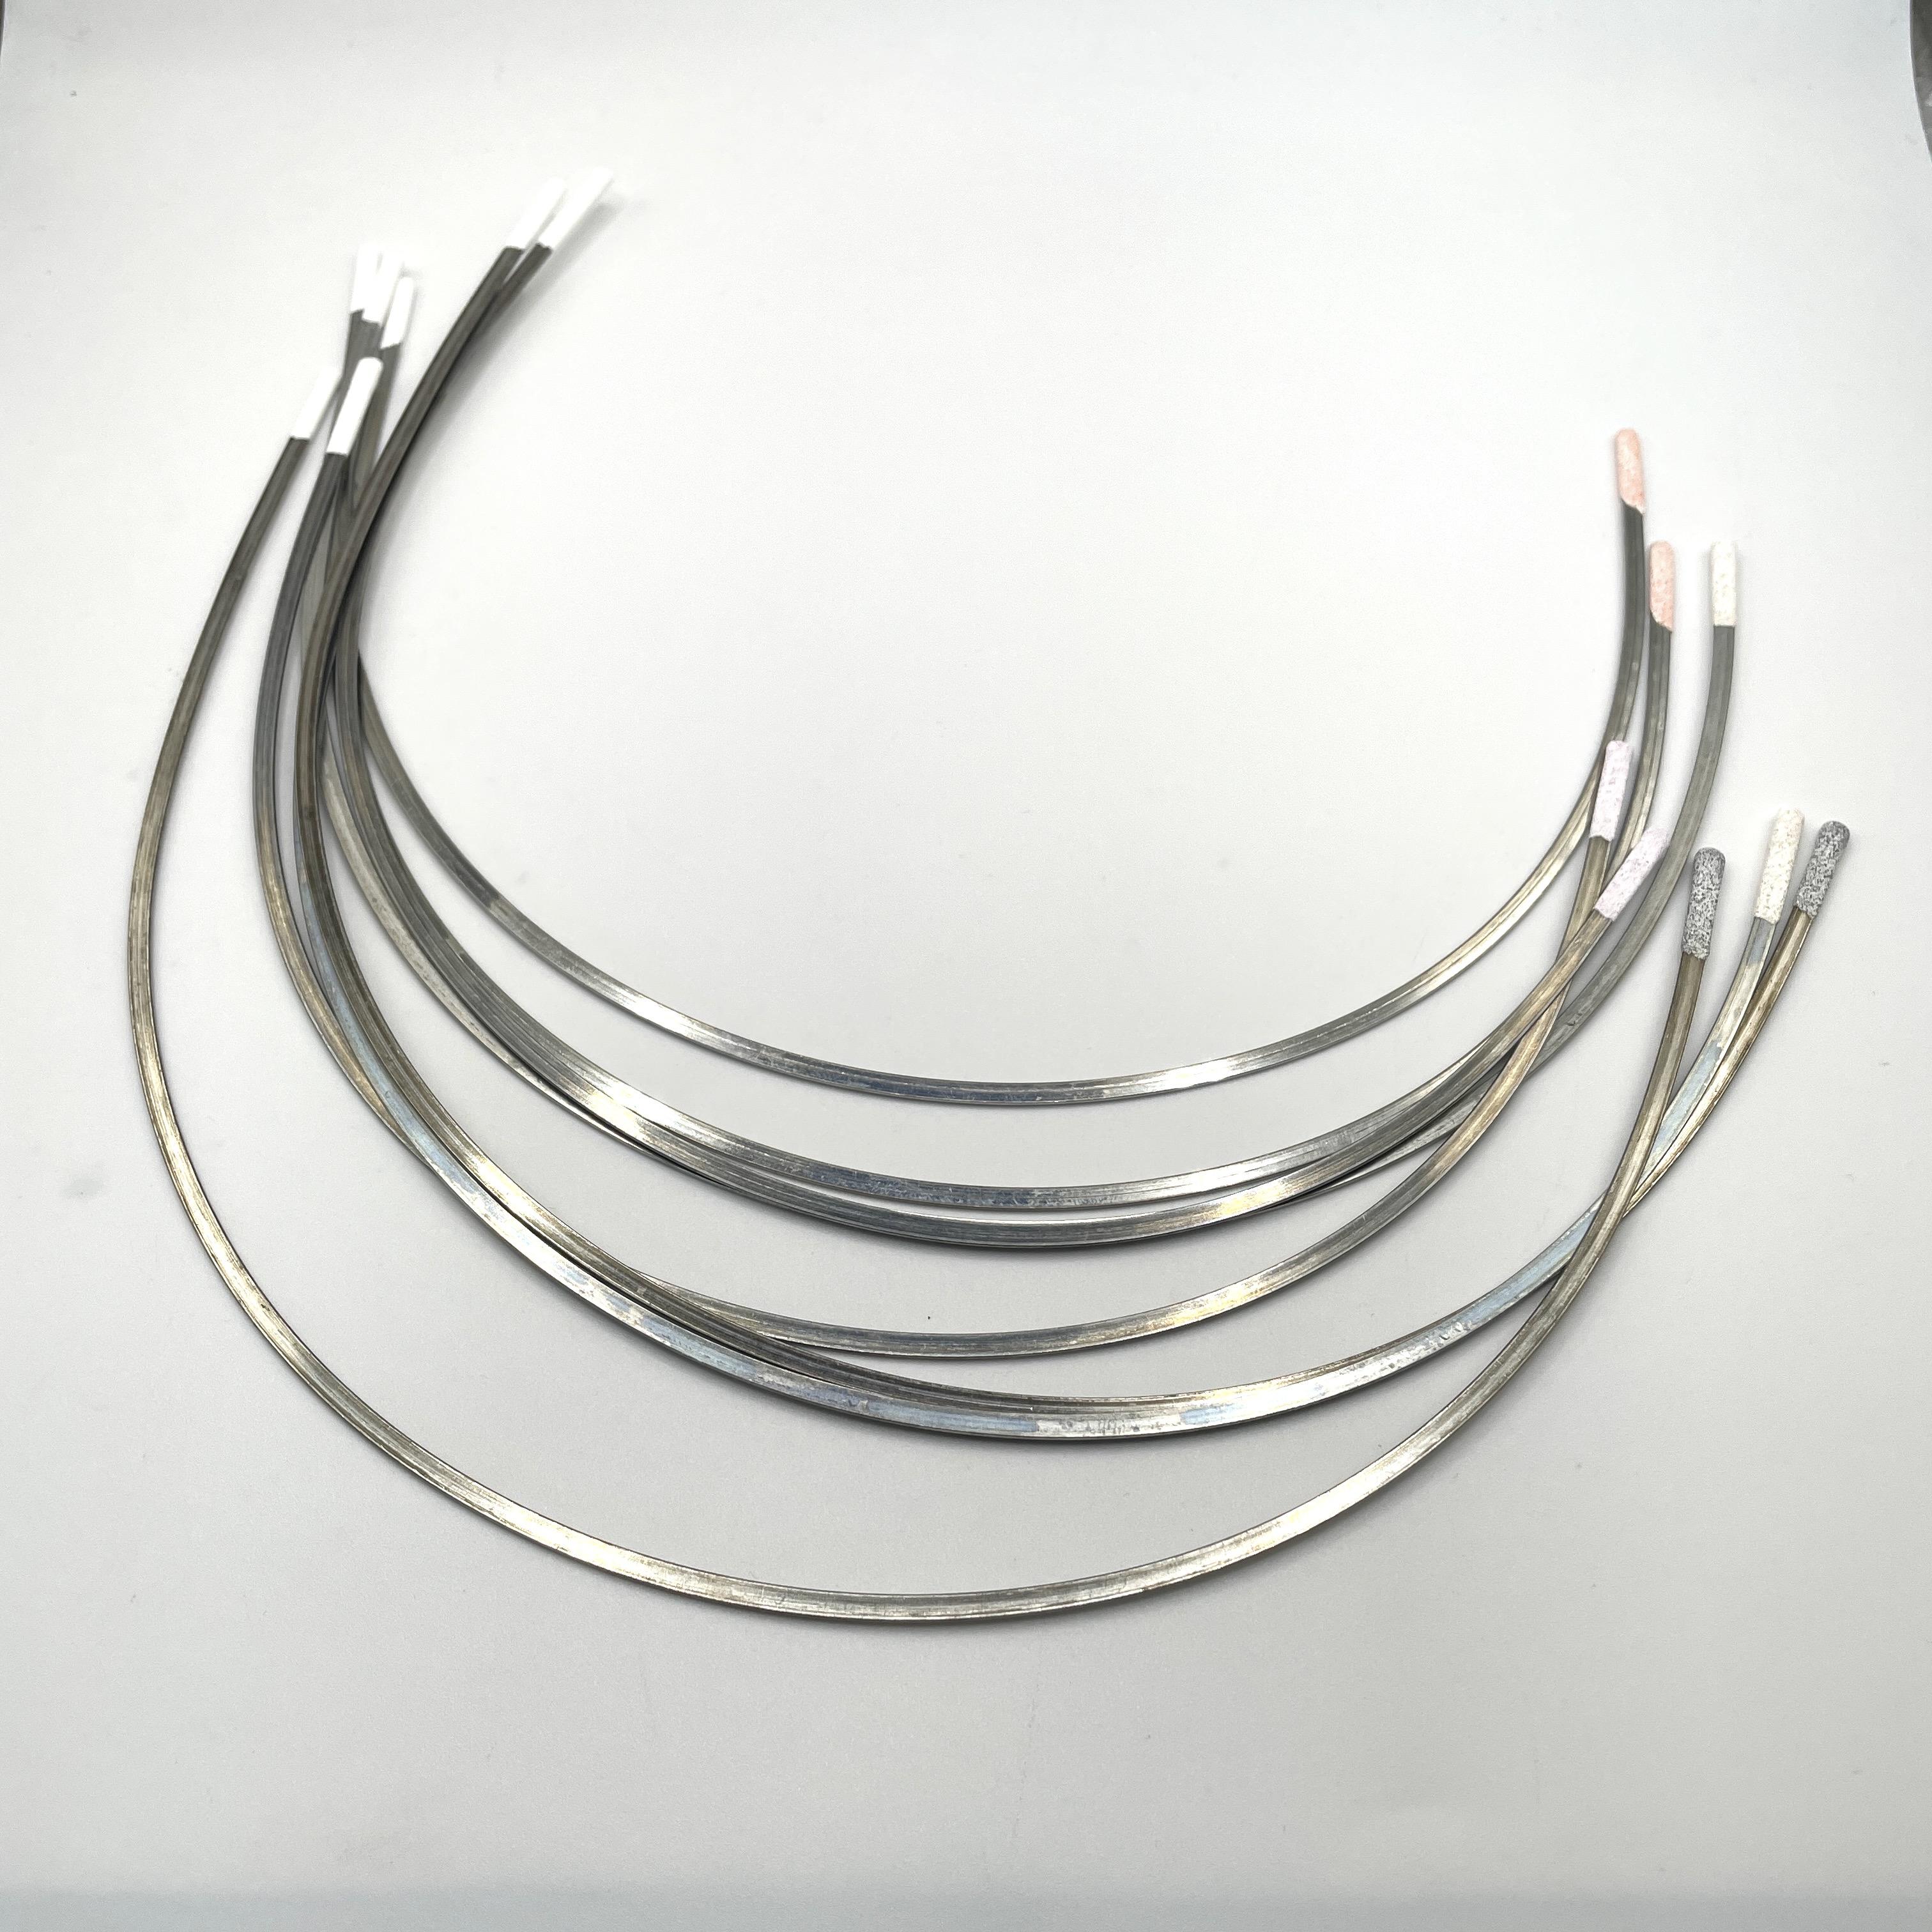 Bra Separator Wire - Uncoated - style SV03290 - 0.2 x 1.5 x 3cm, each